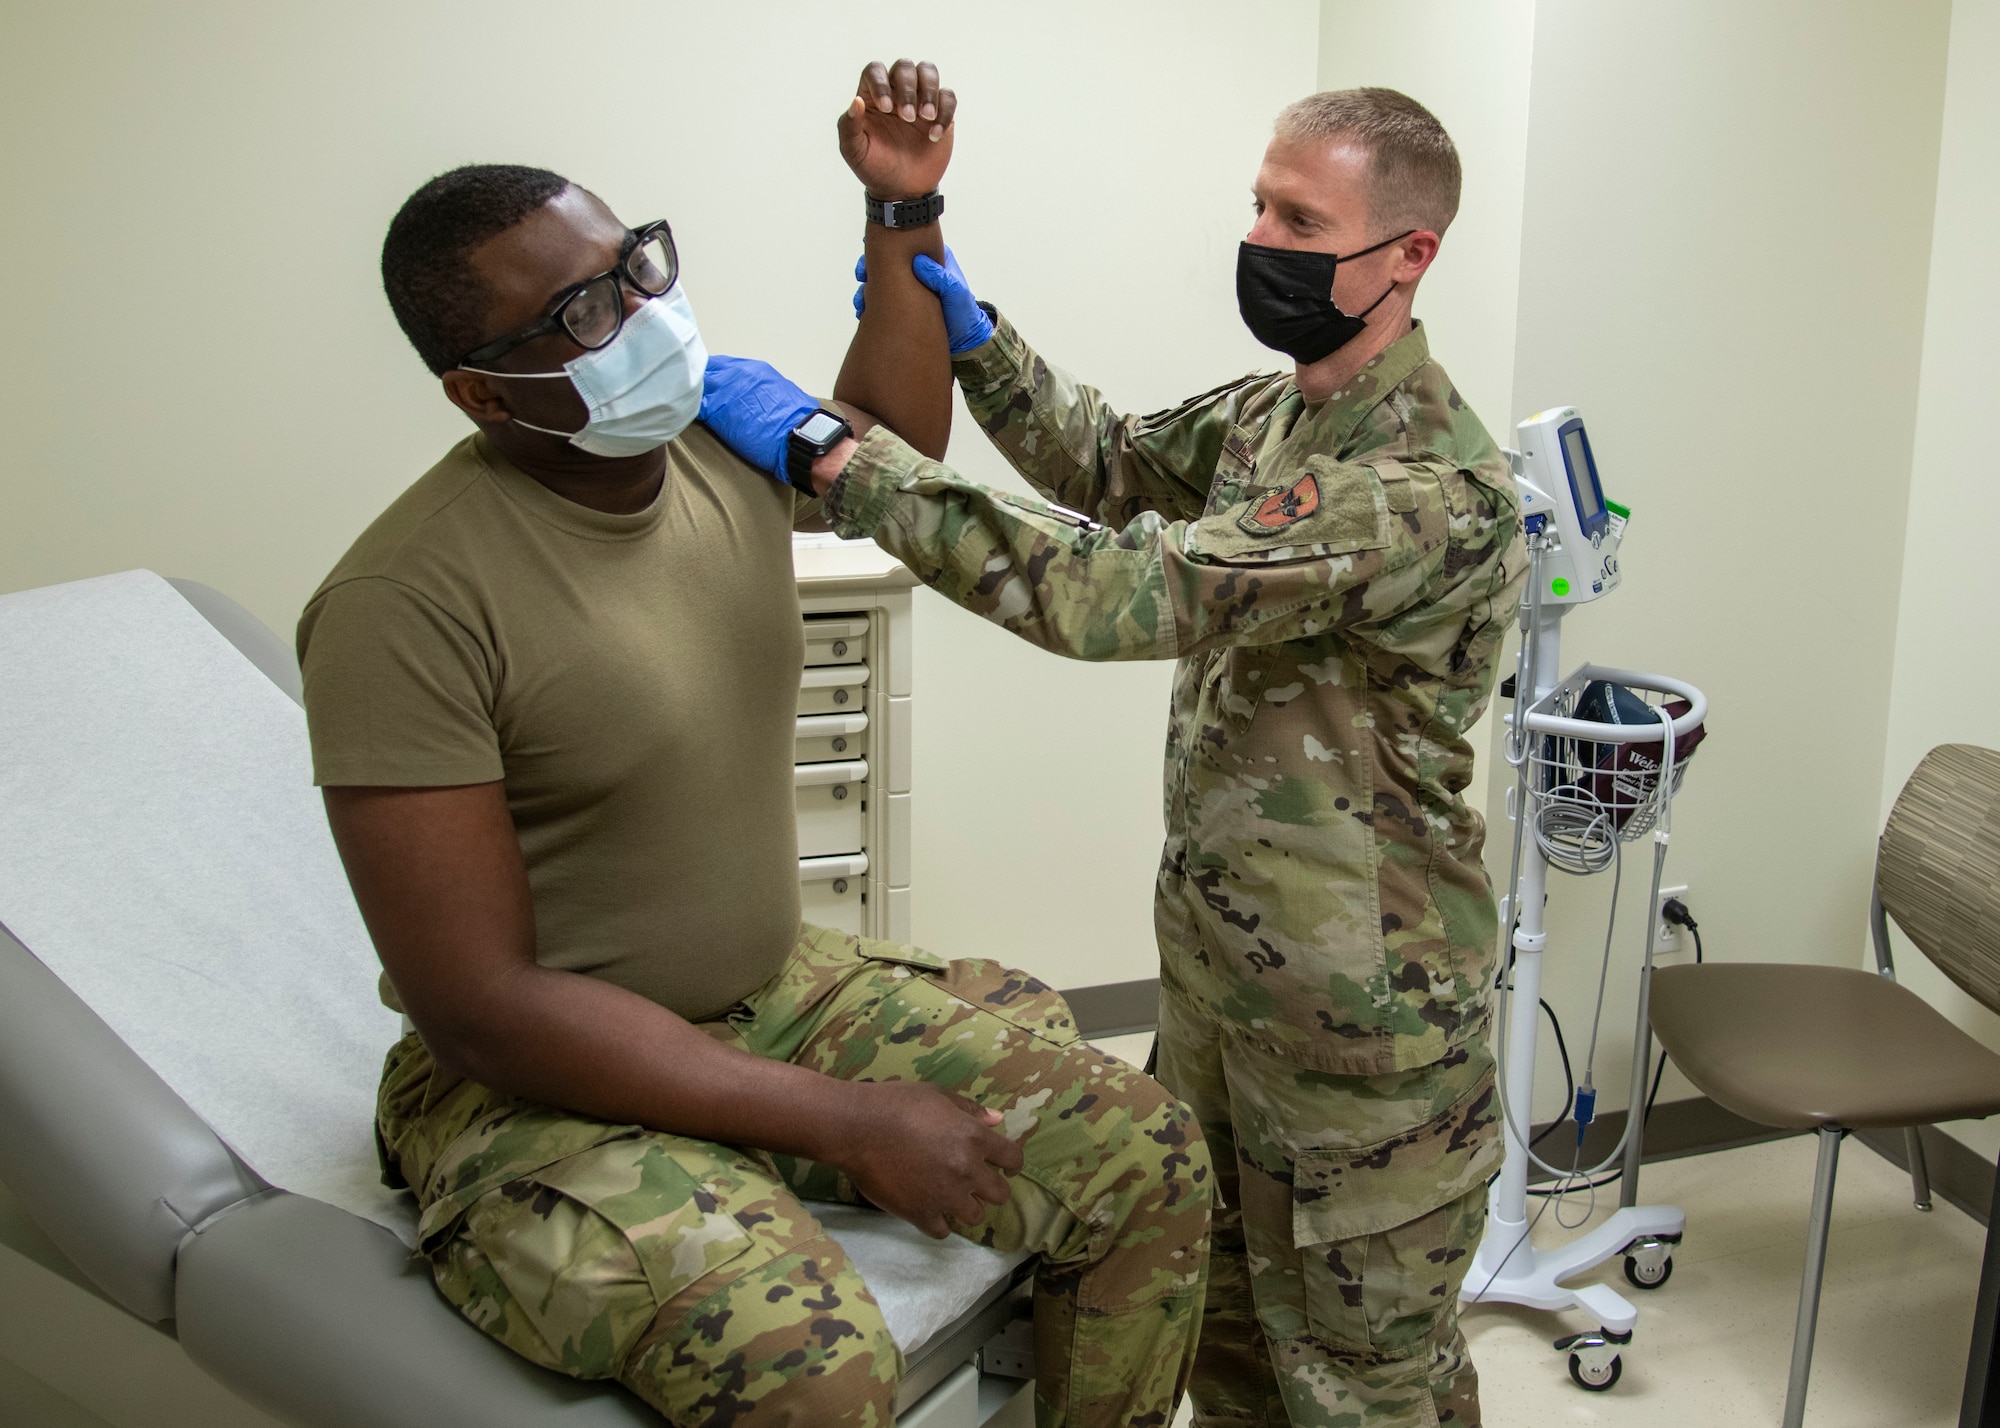 A serviceman is examined at the doctor's office.